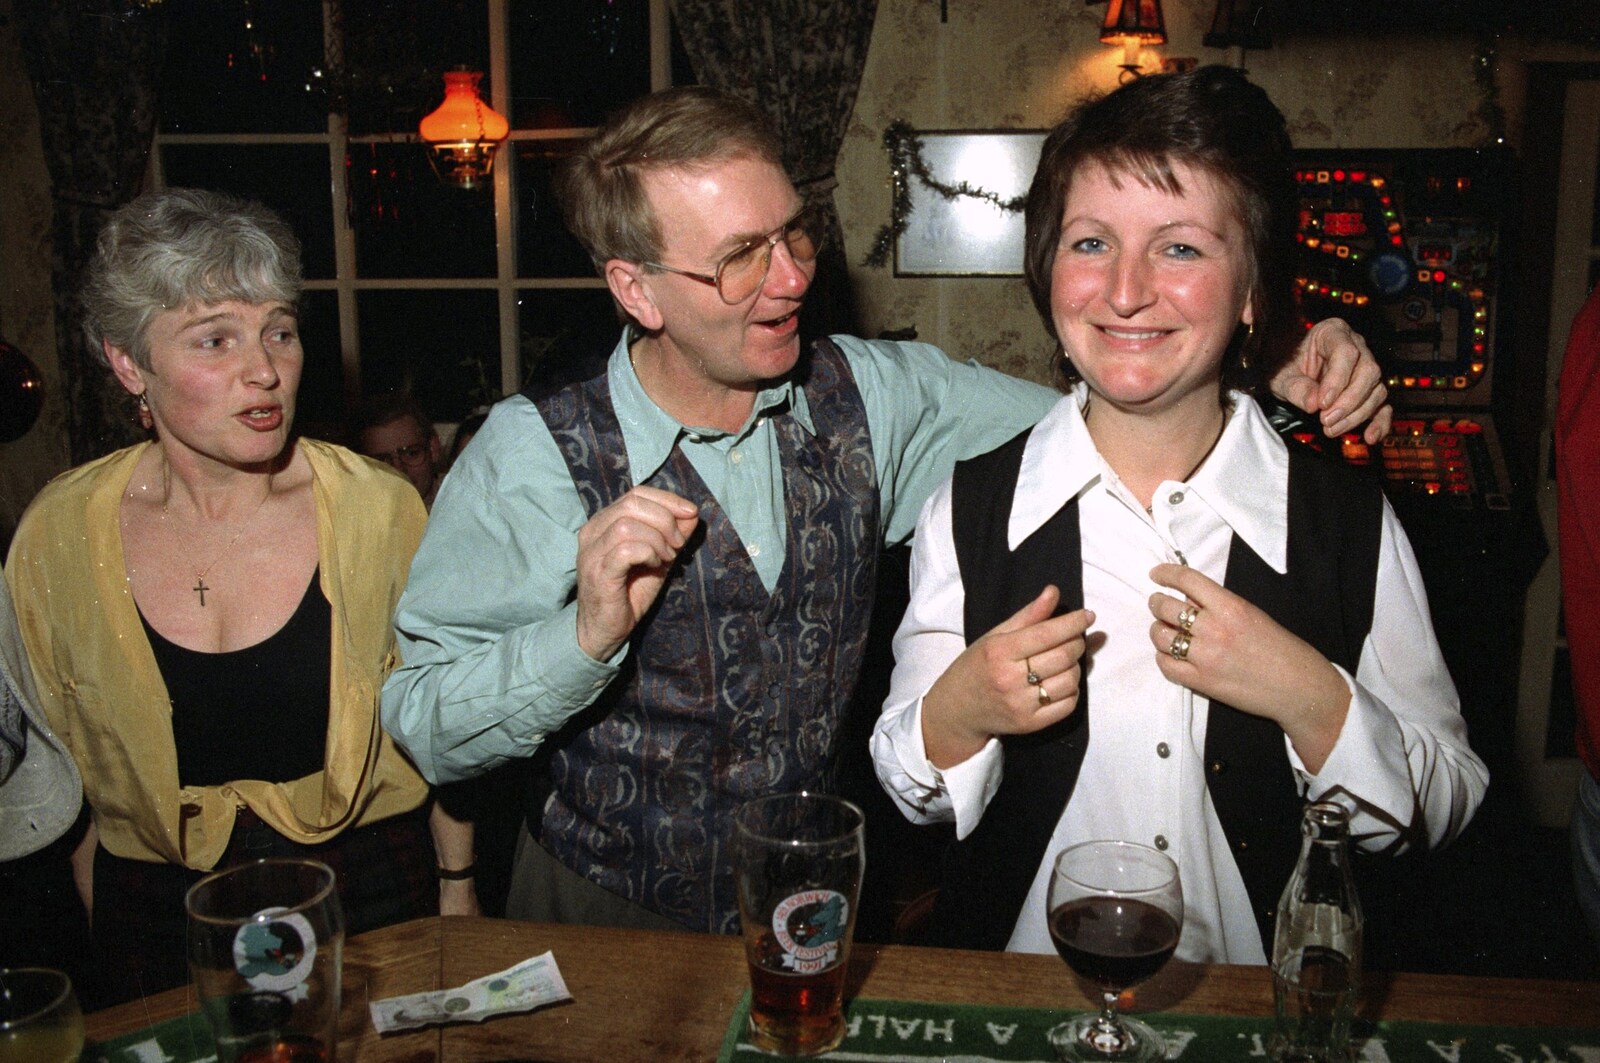 Spammy, John Willy and Davina from New Year's Eve at the Swan Inn, Brome, Suffolk - 31st December 1994